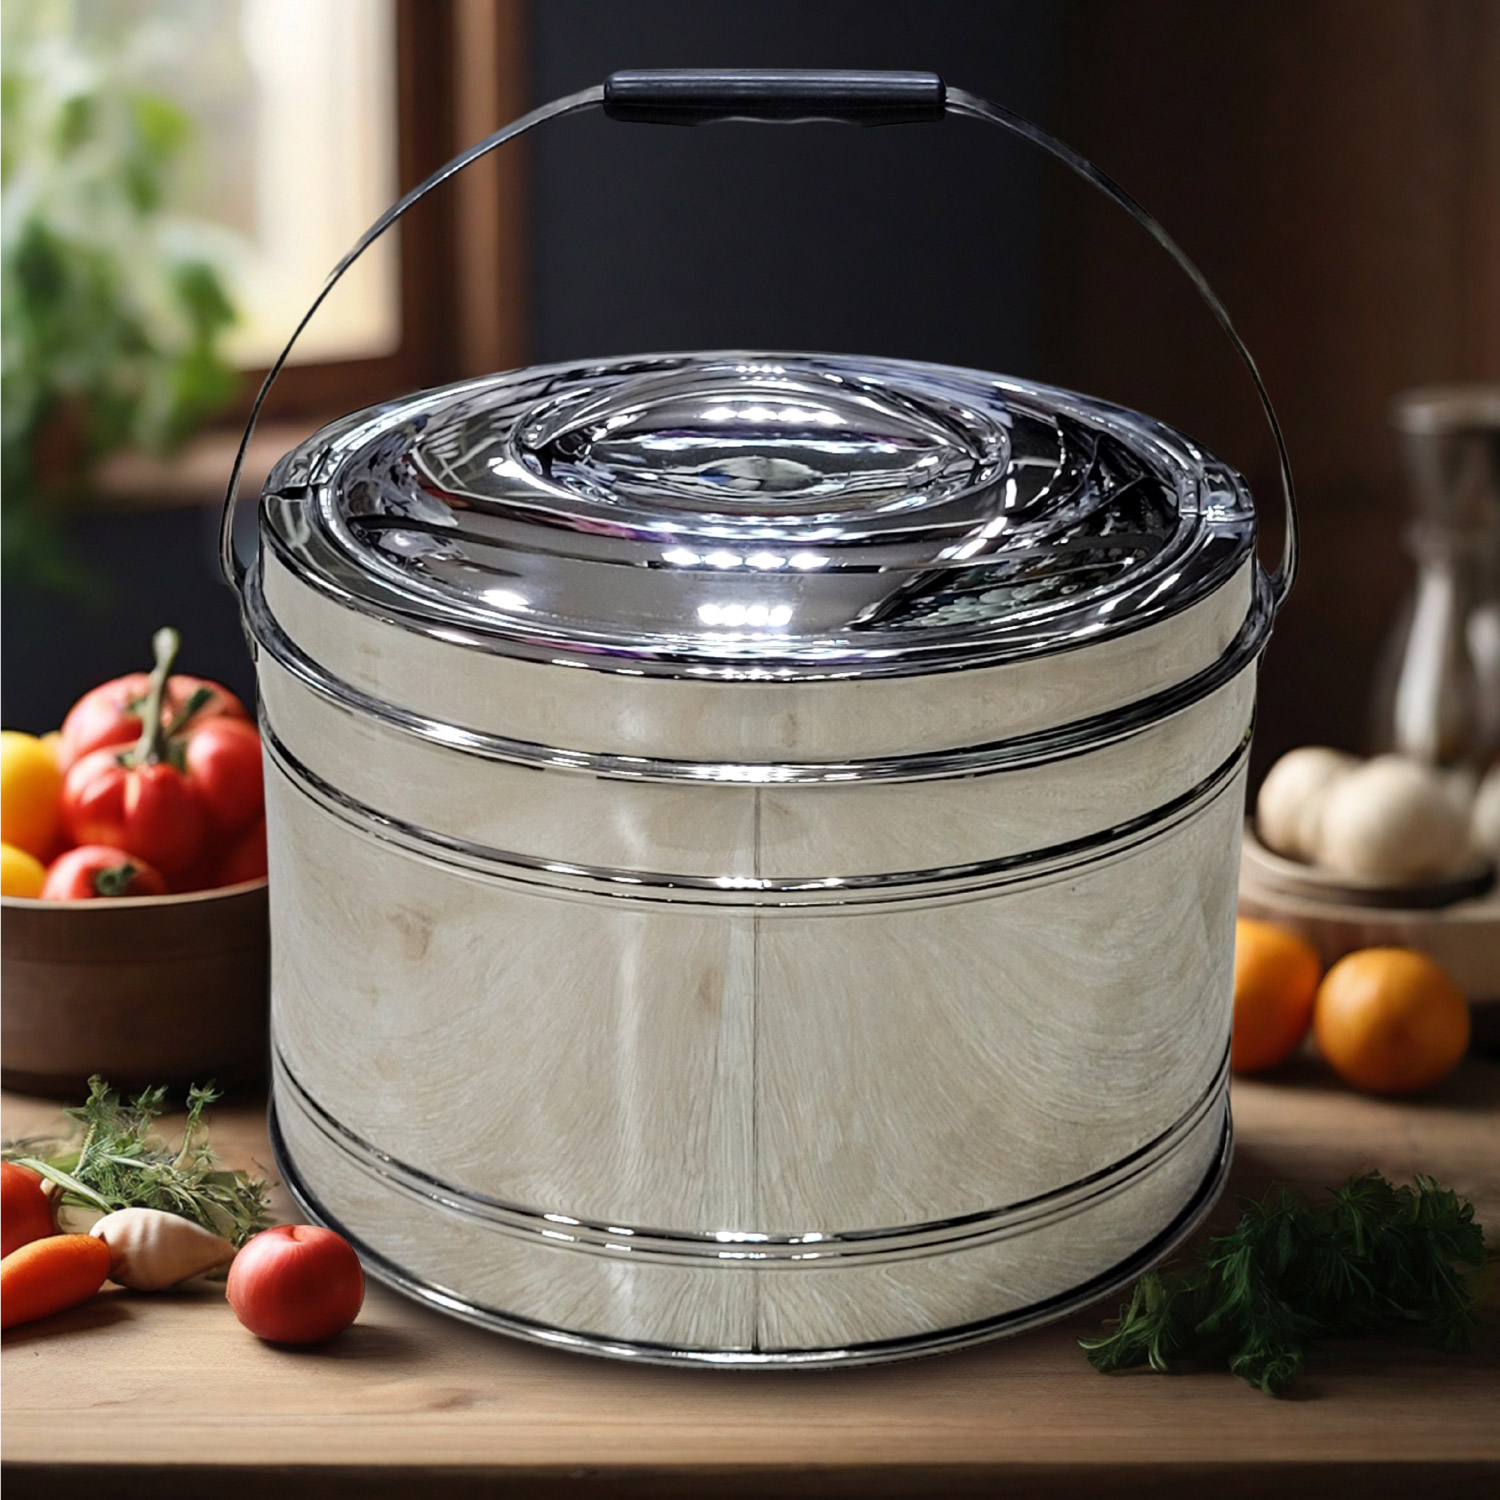 VINOD INSULATED FOOD STORAGE CONTAINERS 5 LTR